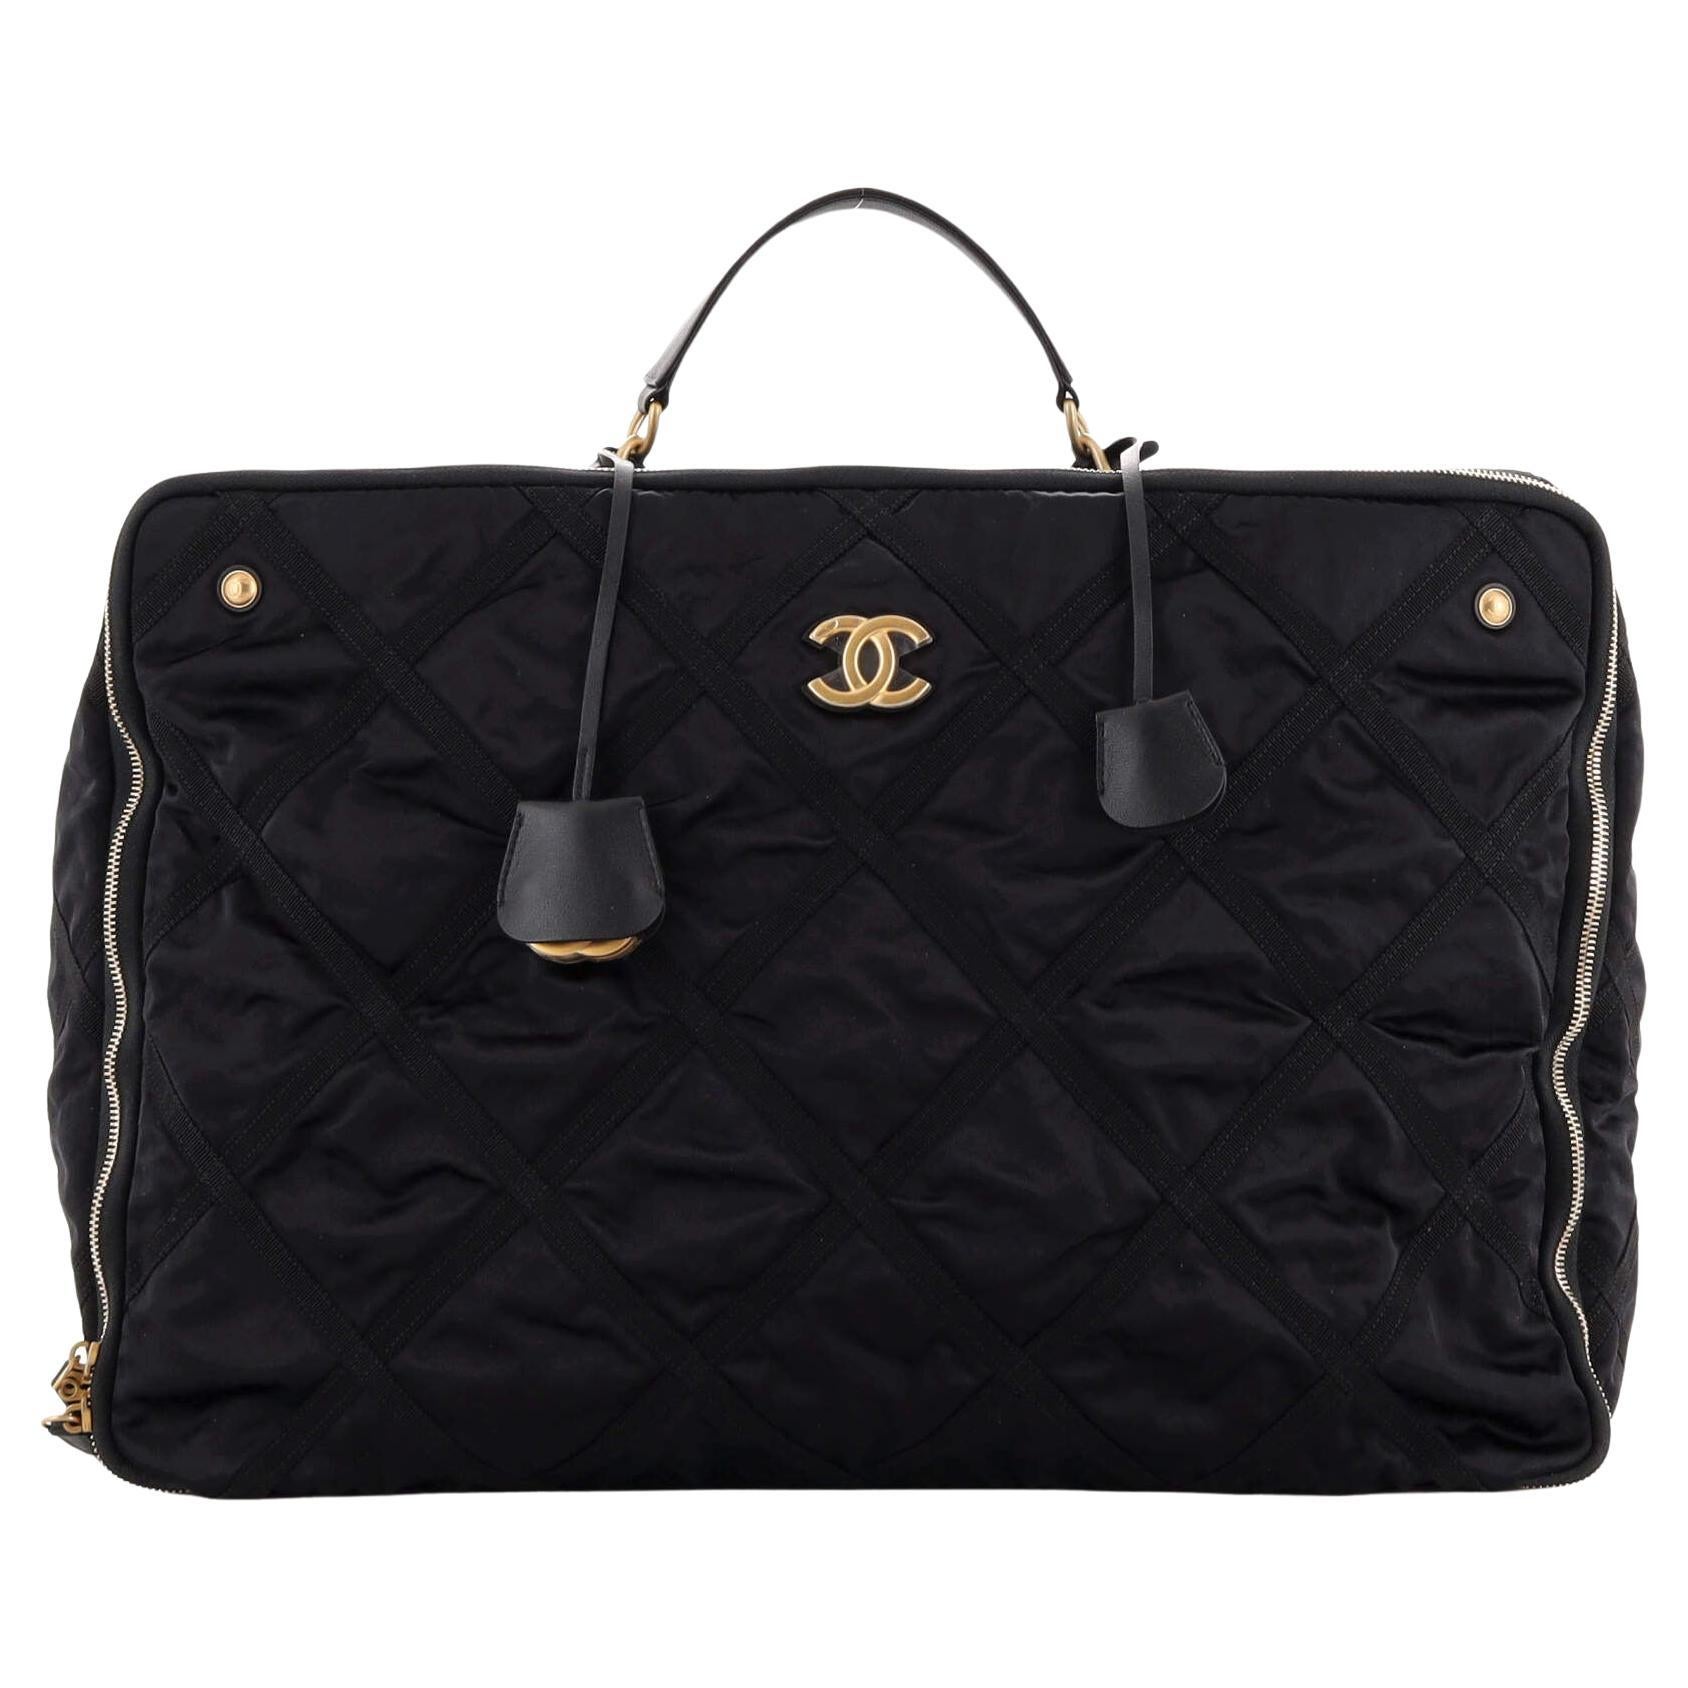 Chanel Lifestyle Travel Handbag Quilted Nylon with Grosgrain Large For Sale